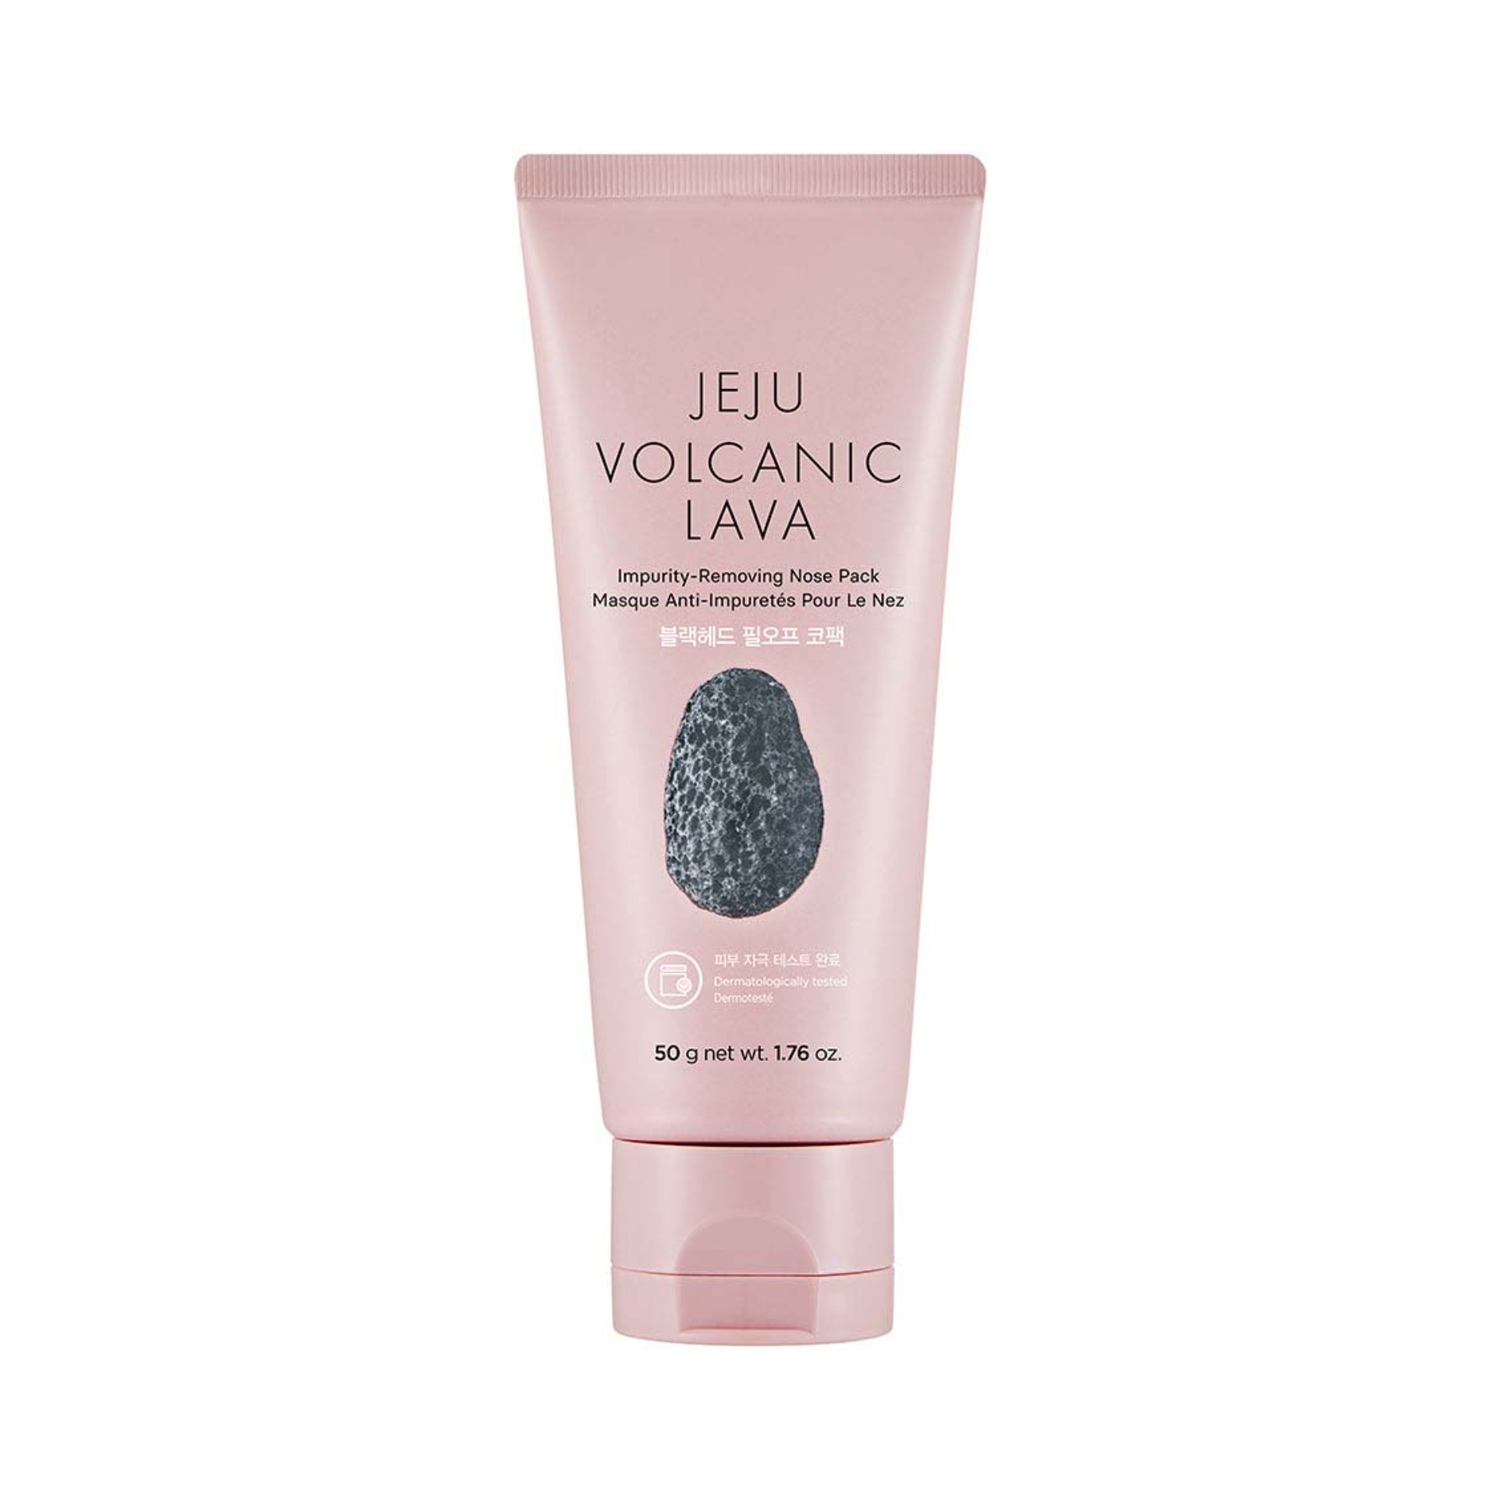 The Face Shop | The Face Shop Jeju Volcanic Lava Impurity Removing Nose Pack (50g)